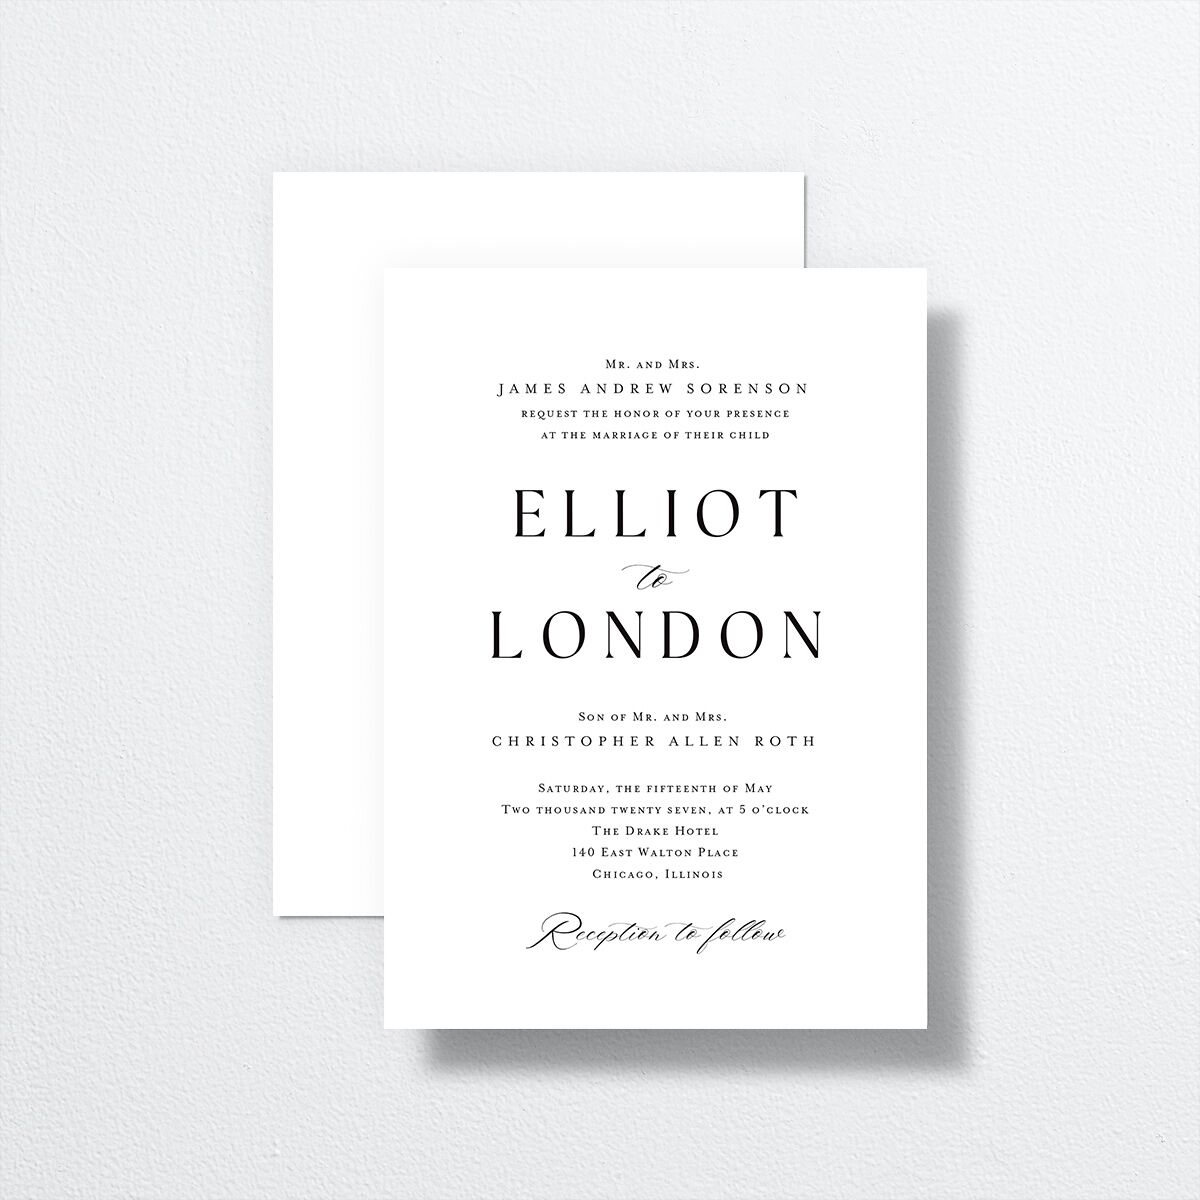 Timeless Typography Wedding Invitations front-and-back